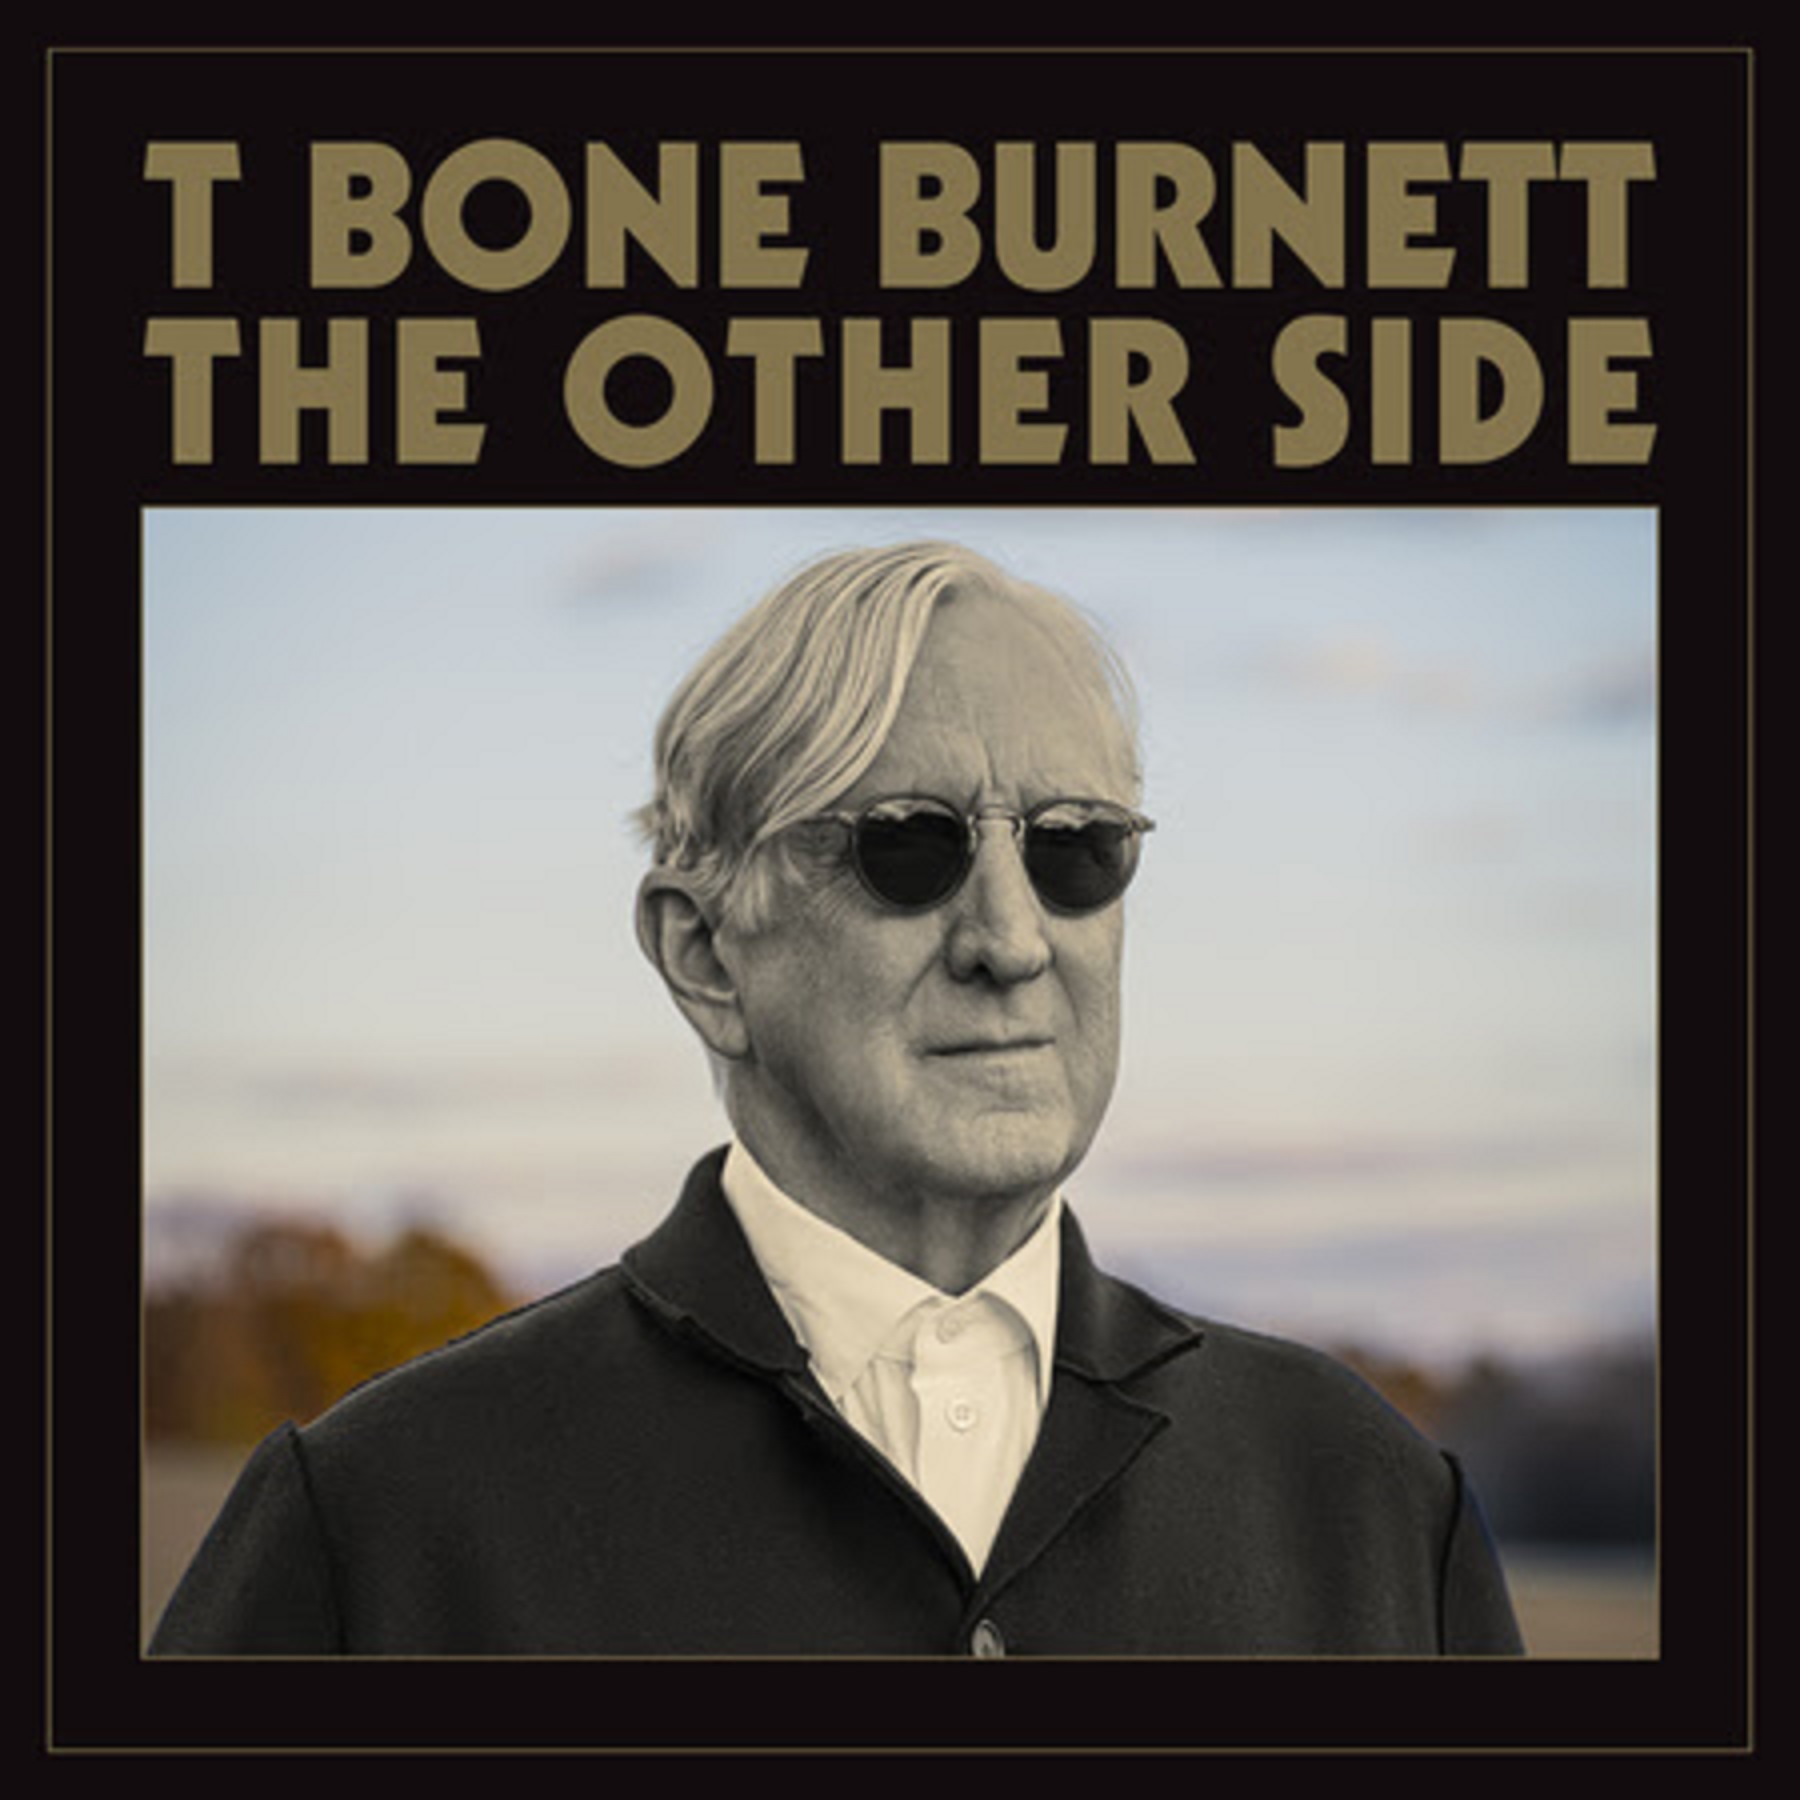 T Bone Burnett to release first solo album in nearly 20 years